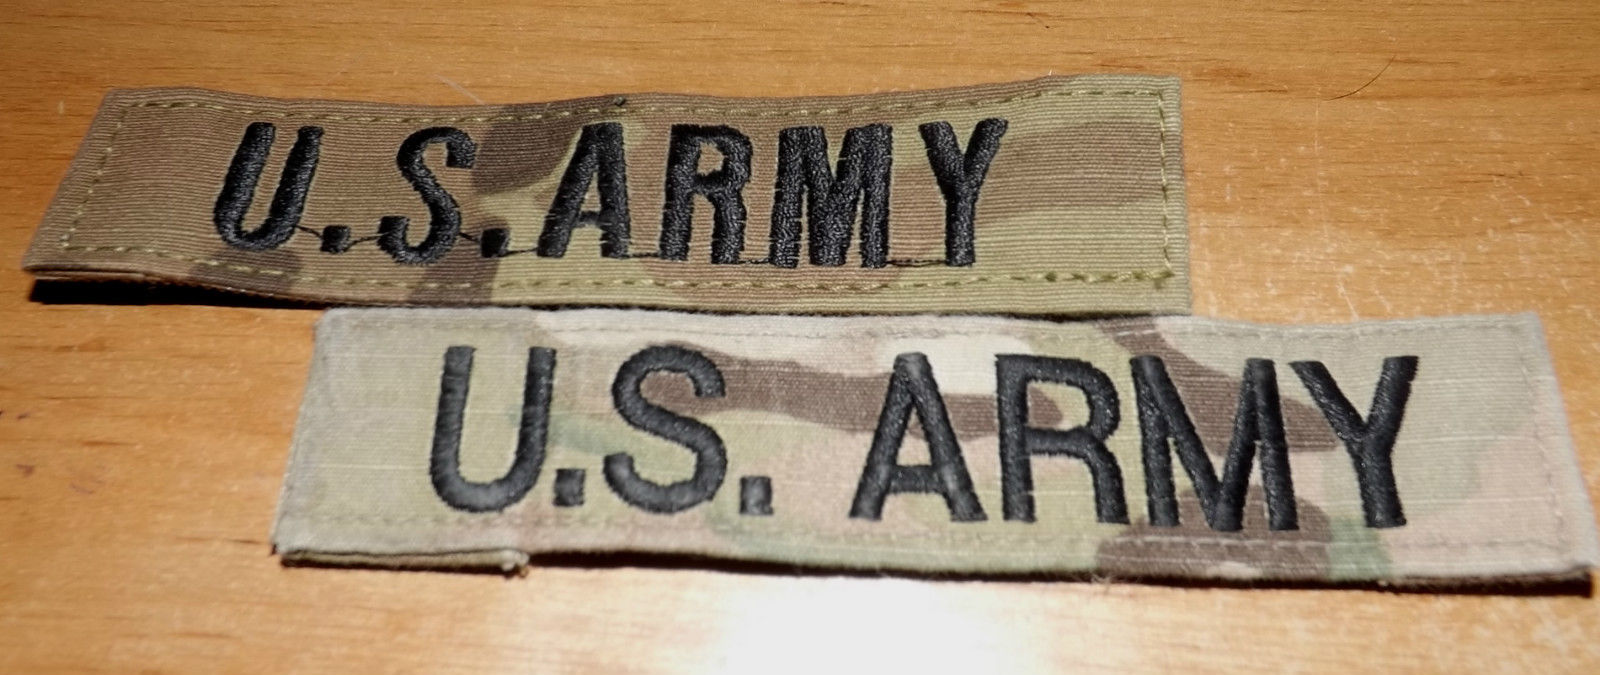 Lot of TWO Hook & Loop Backed Multi-CAM US ARMY Pocket tapes for Uniform